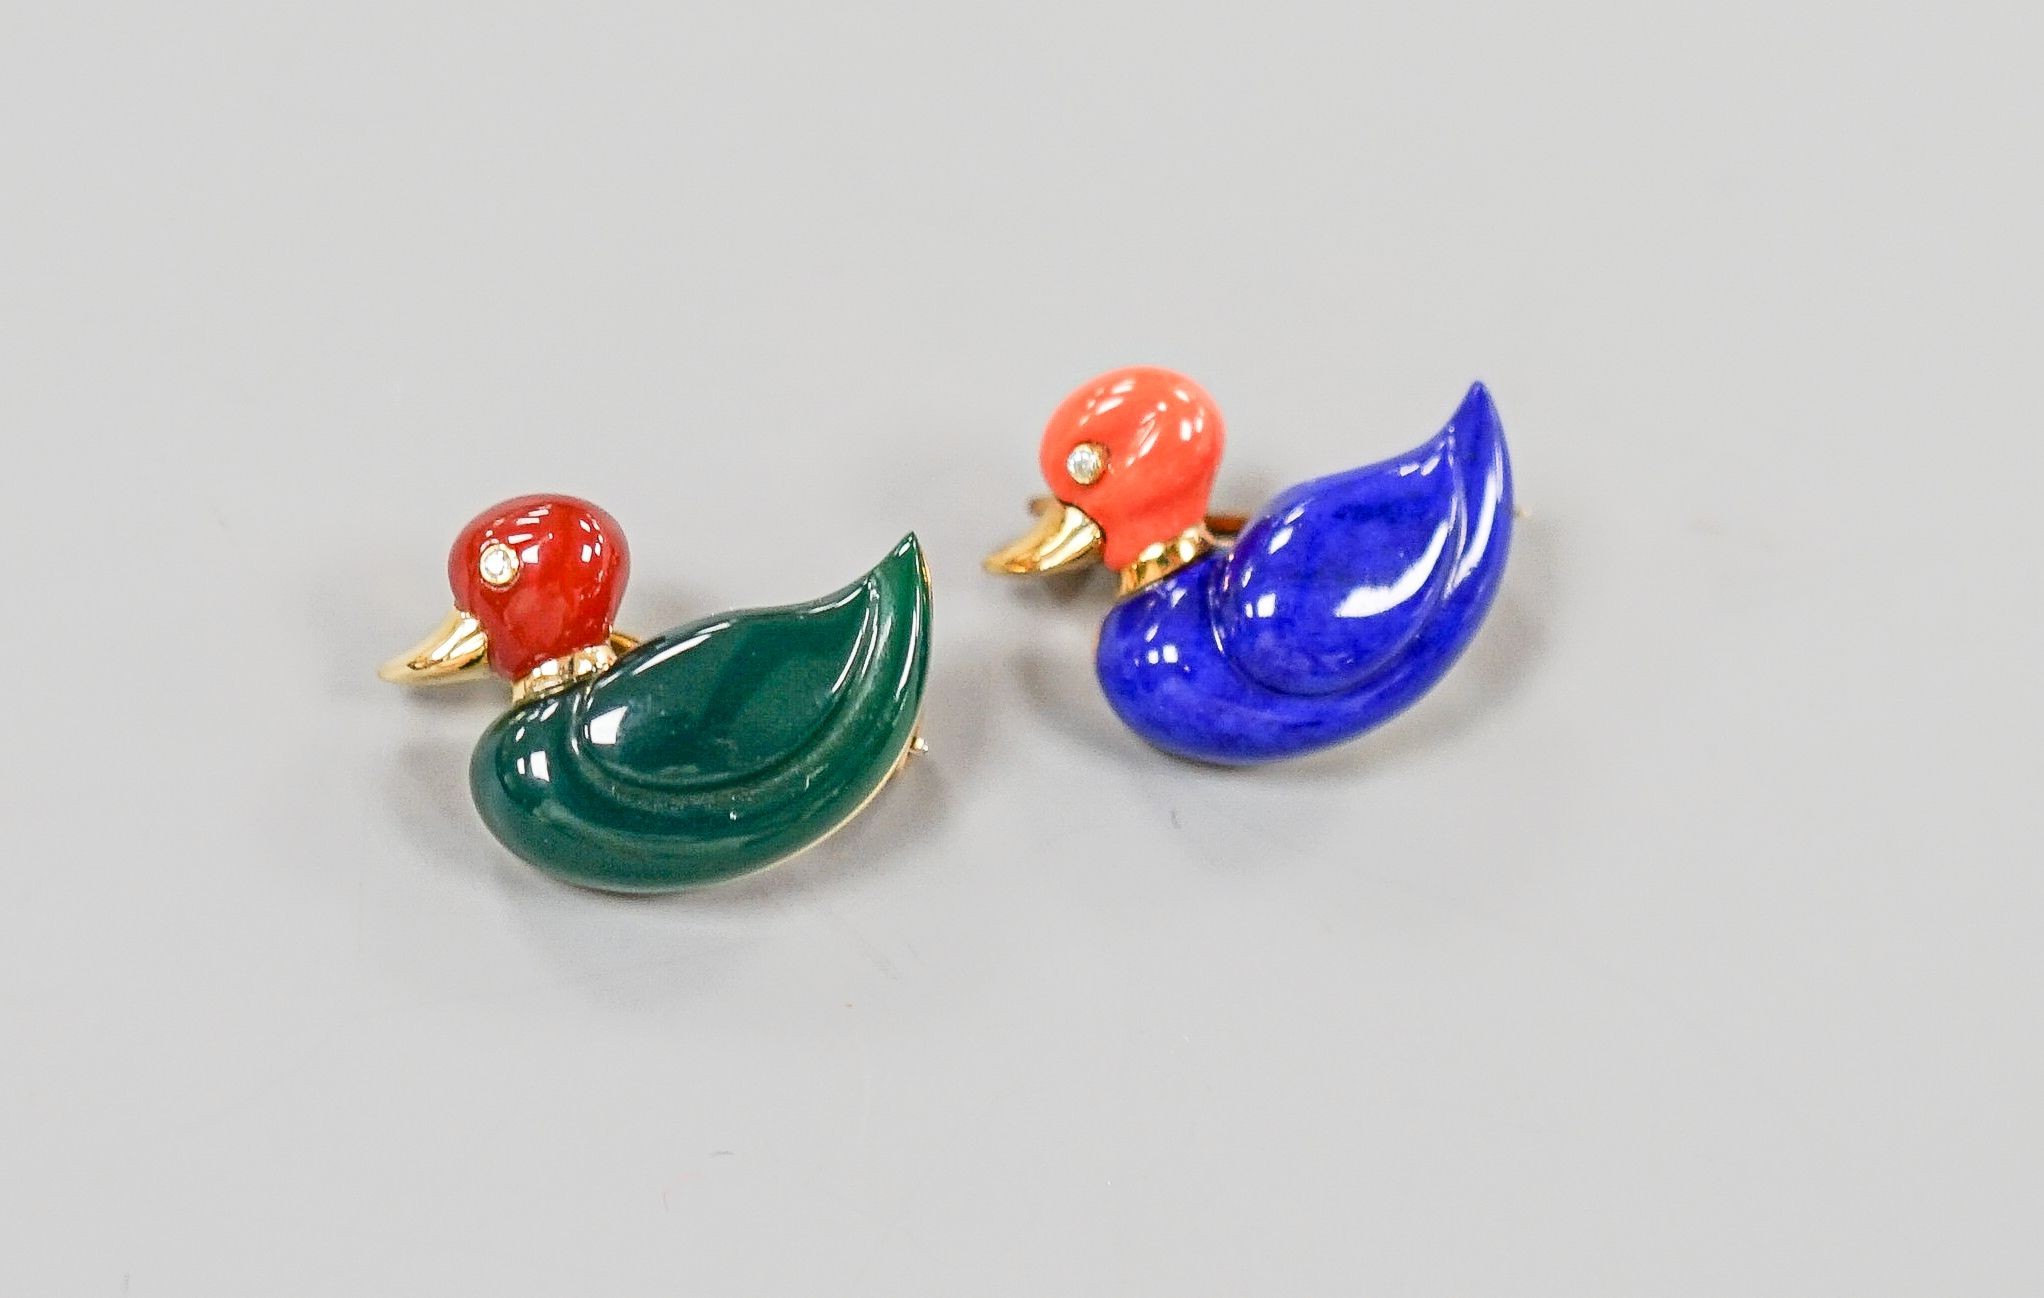 Two modern 18ct gold, diamond and semi precious stone set brooches, each modelled as a duck, 20mm gross weight 8.1 grams.